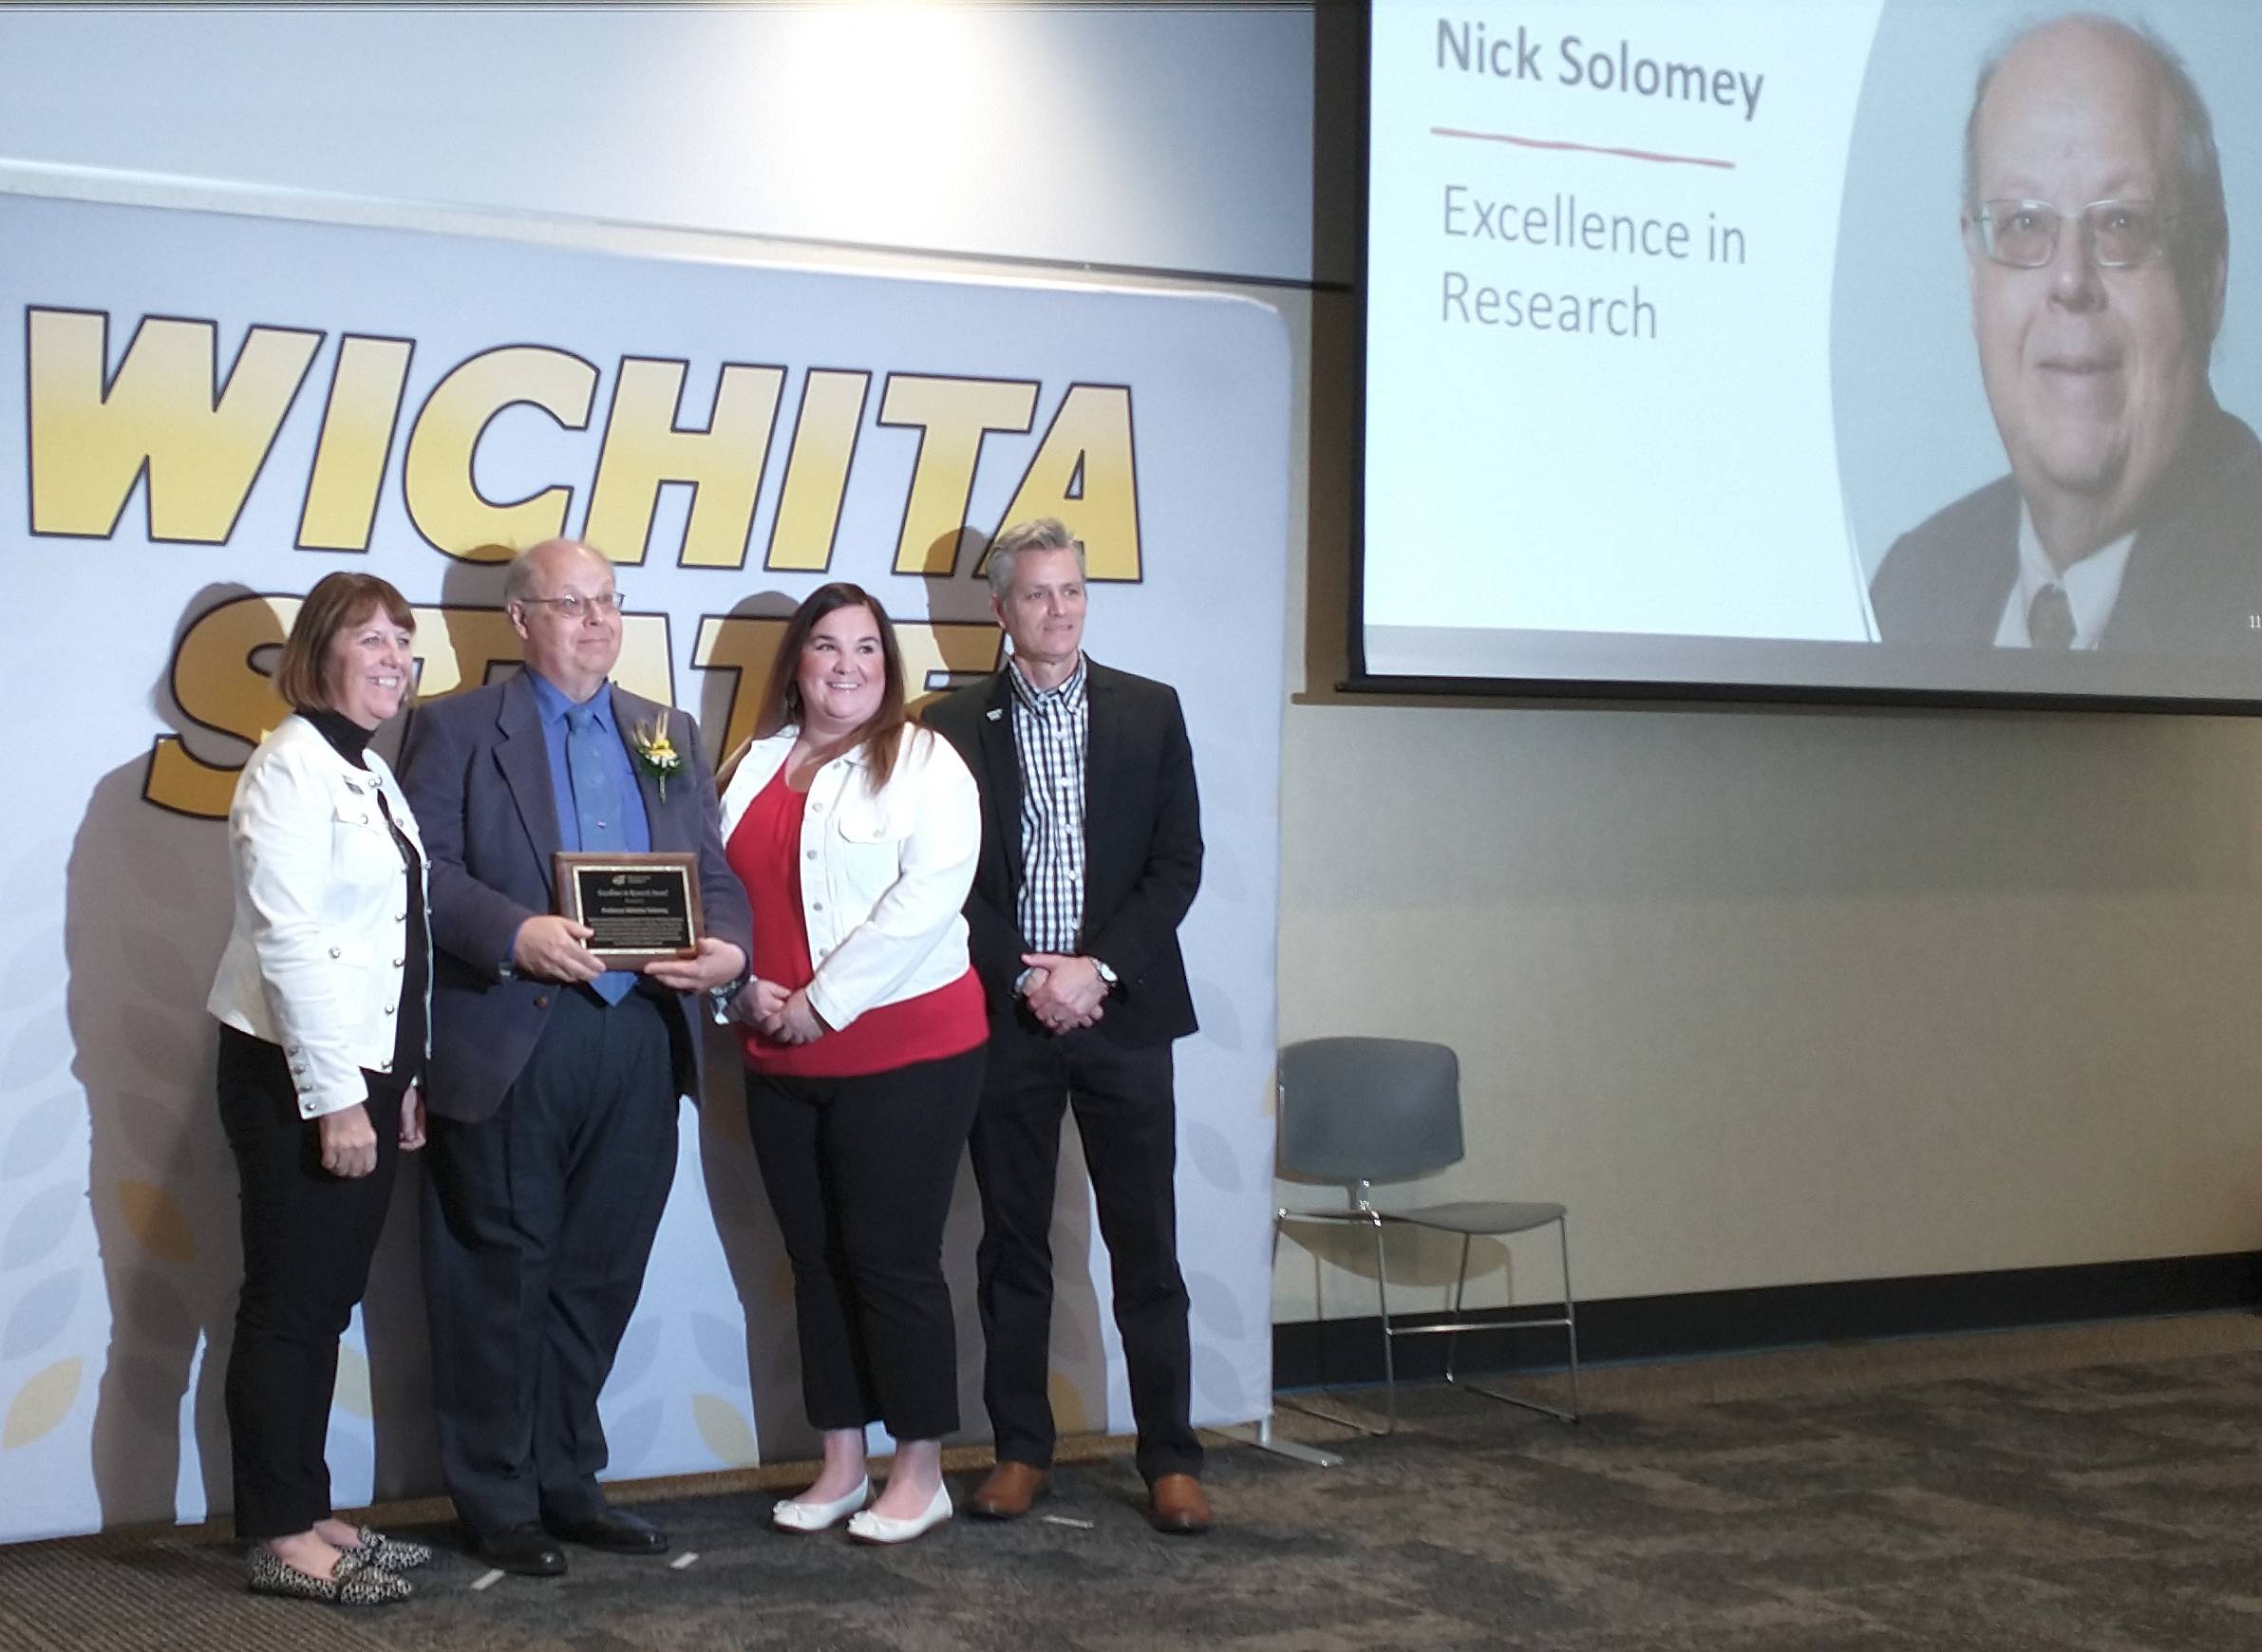 Prof. Solomey receives the University Excellence in Research award on May 6, 2022.